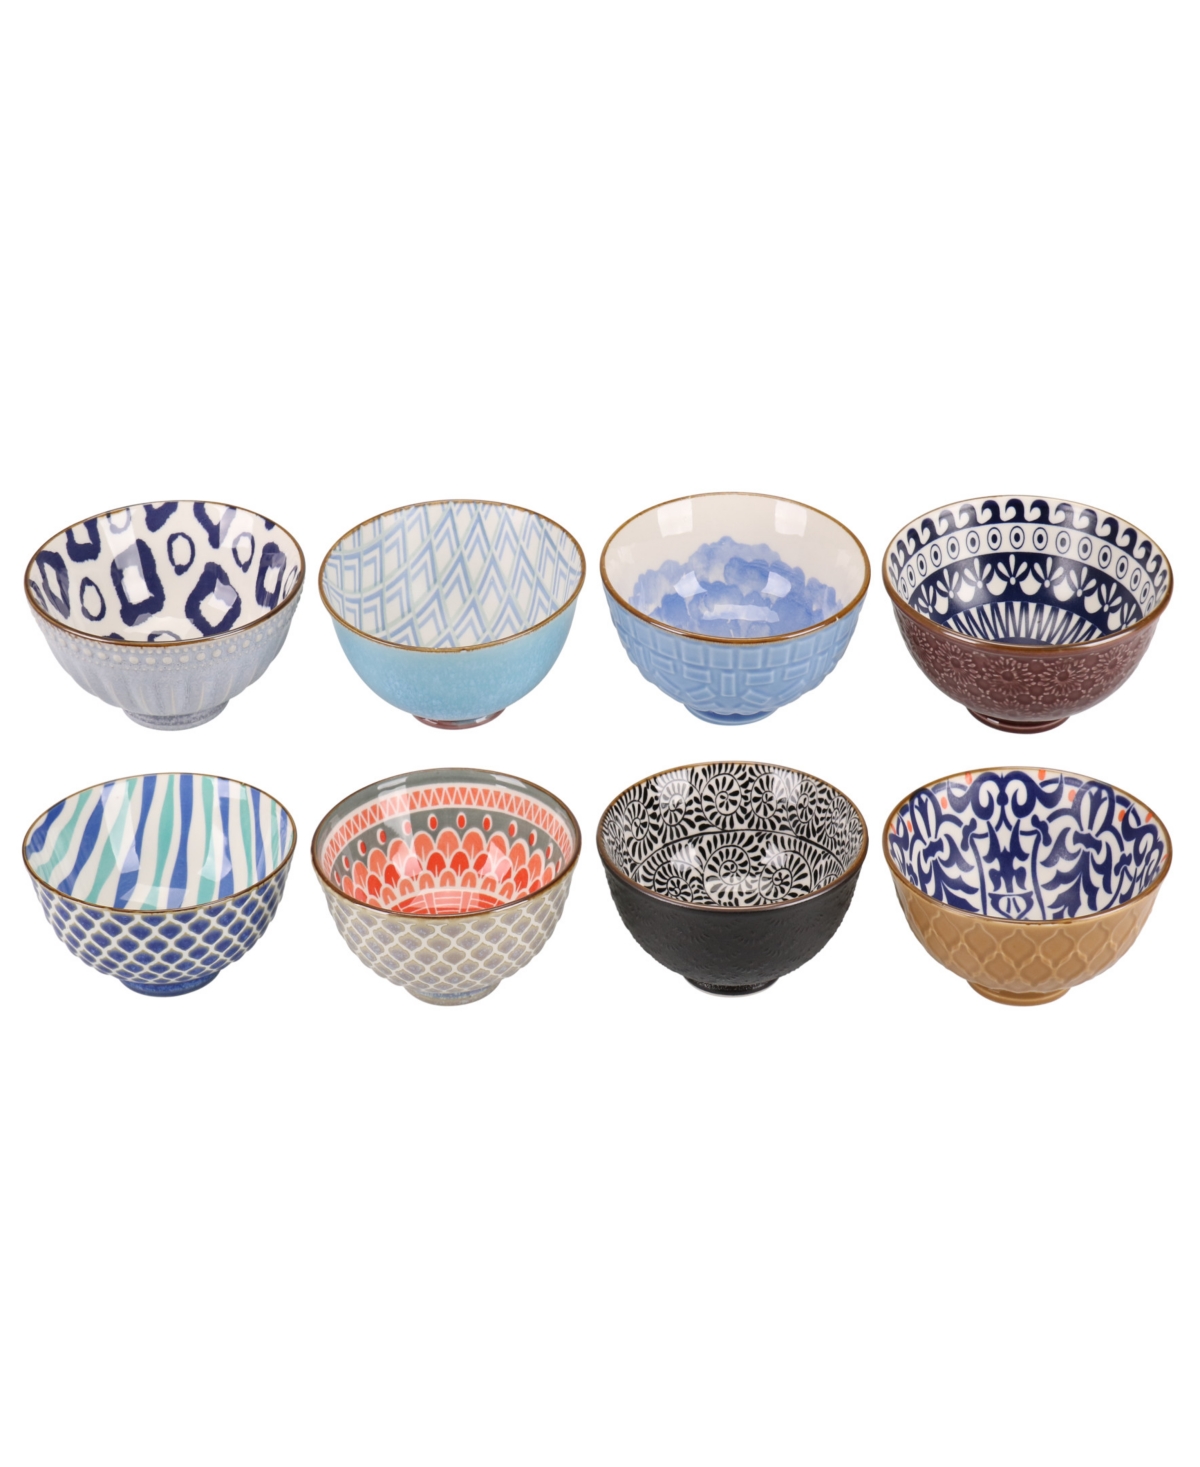 Ooh LaLa Mix and Match 10 Ounce Bowls, Set of 8 - Multi